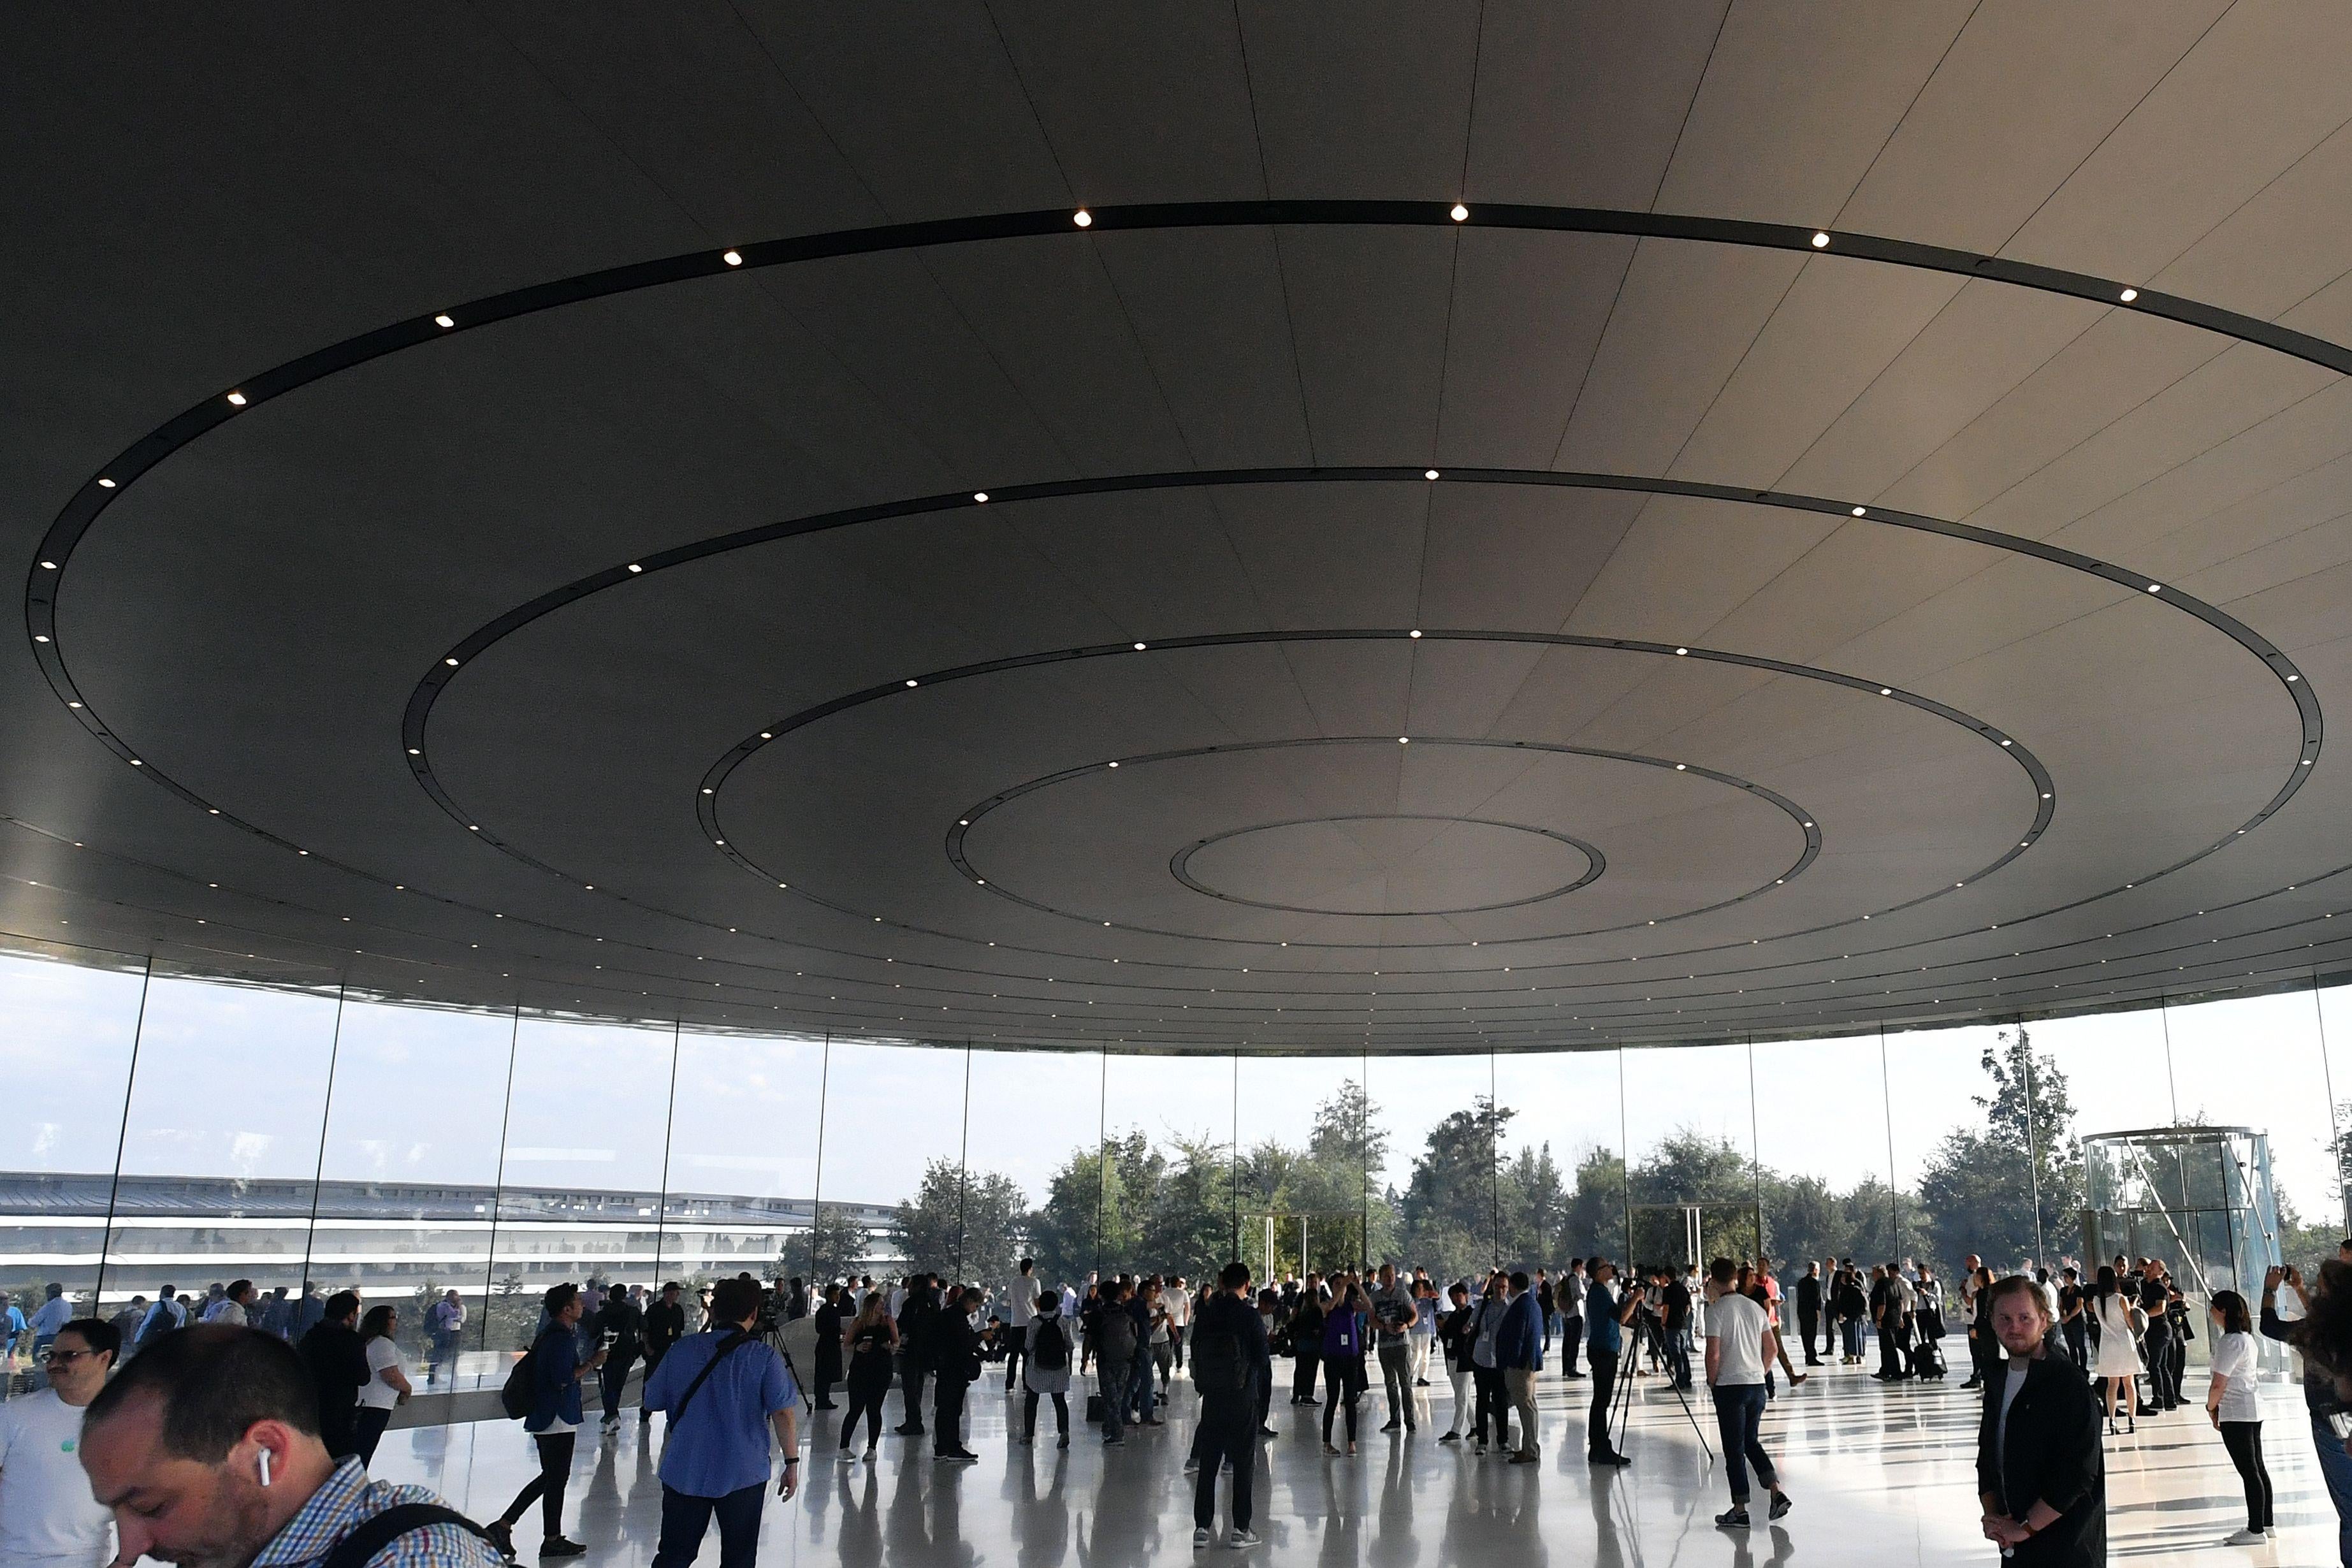 People gather at Apple's new headquarters in Cupertino, California.